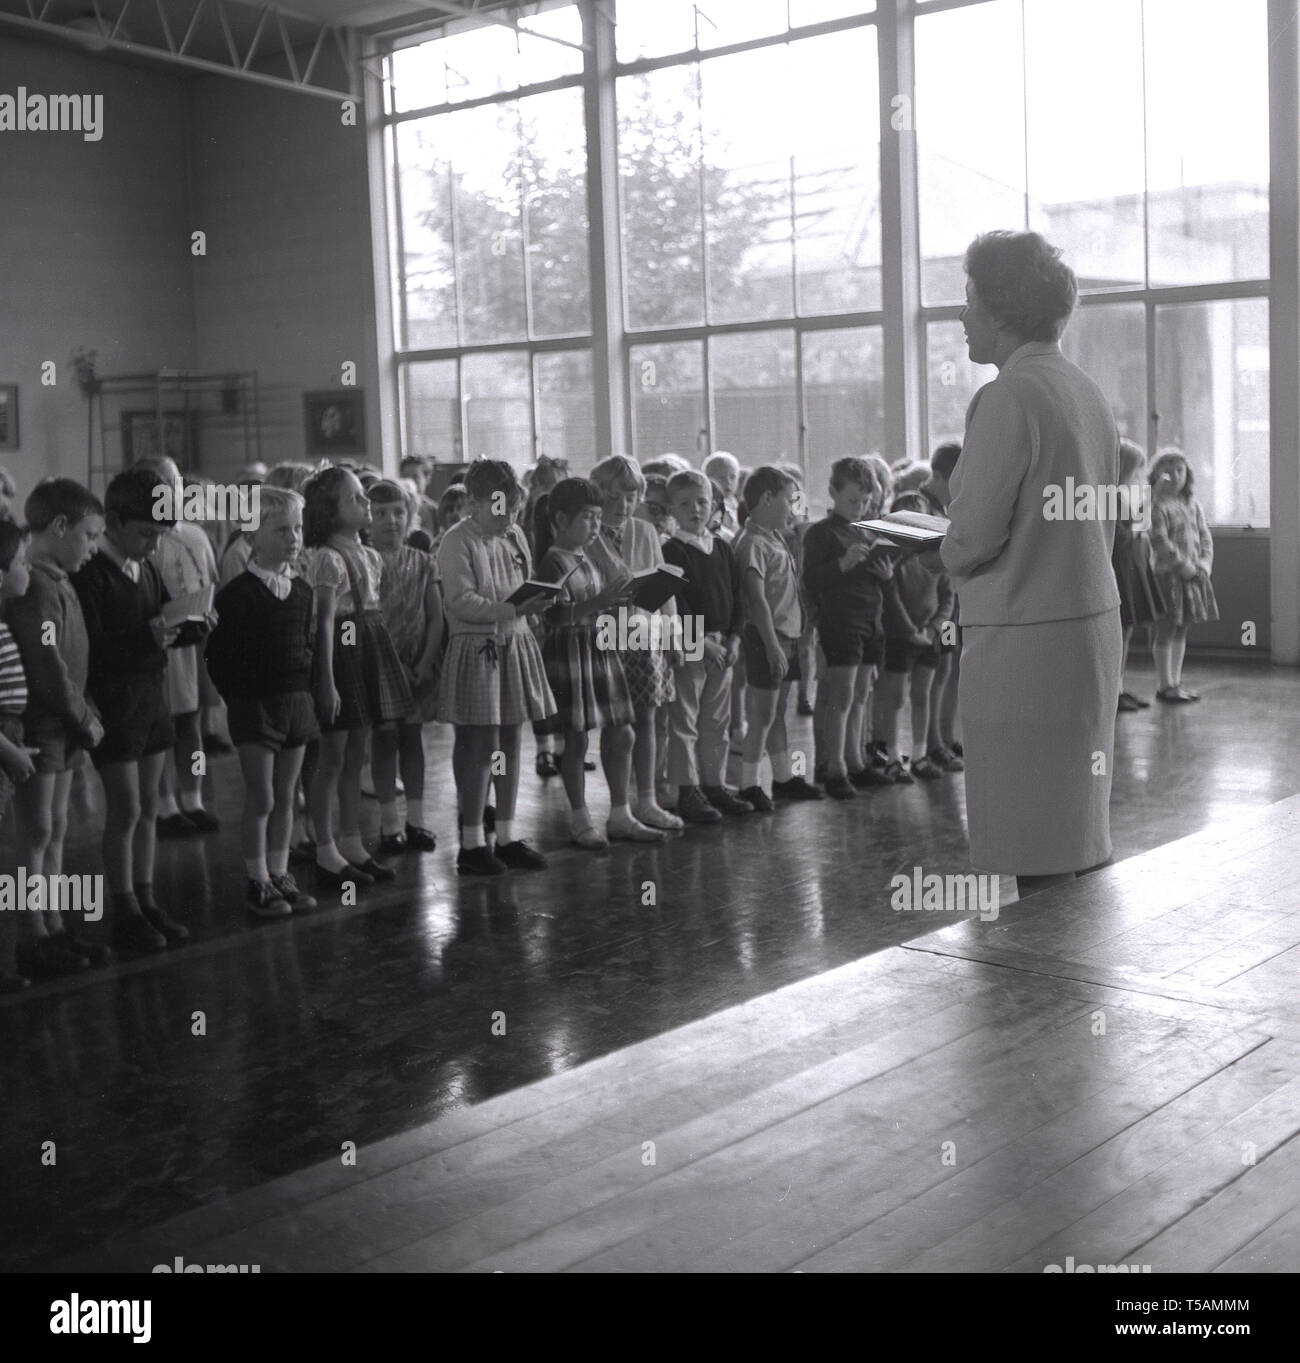 1960s, historical, headmistress reading a passage from a book - possibly the bible - to a group of  primary school children standing in a line at morning assembly, England, UK. Stock Photo